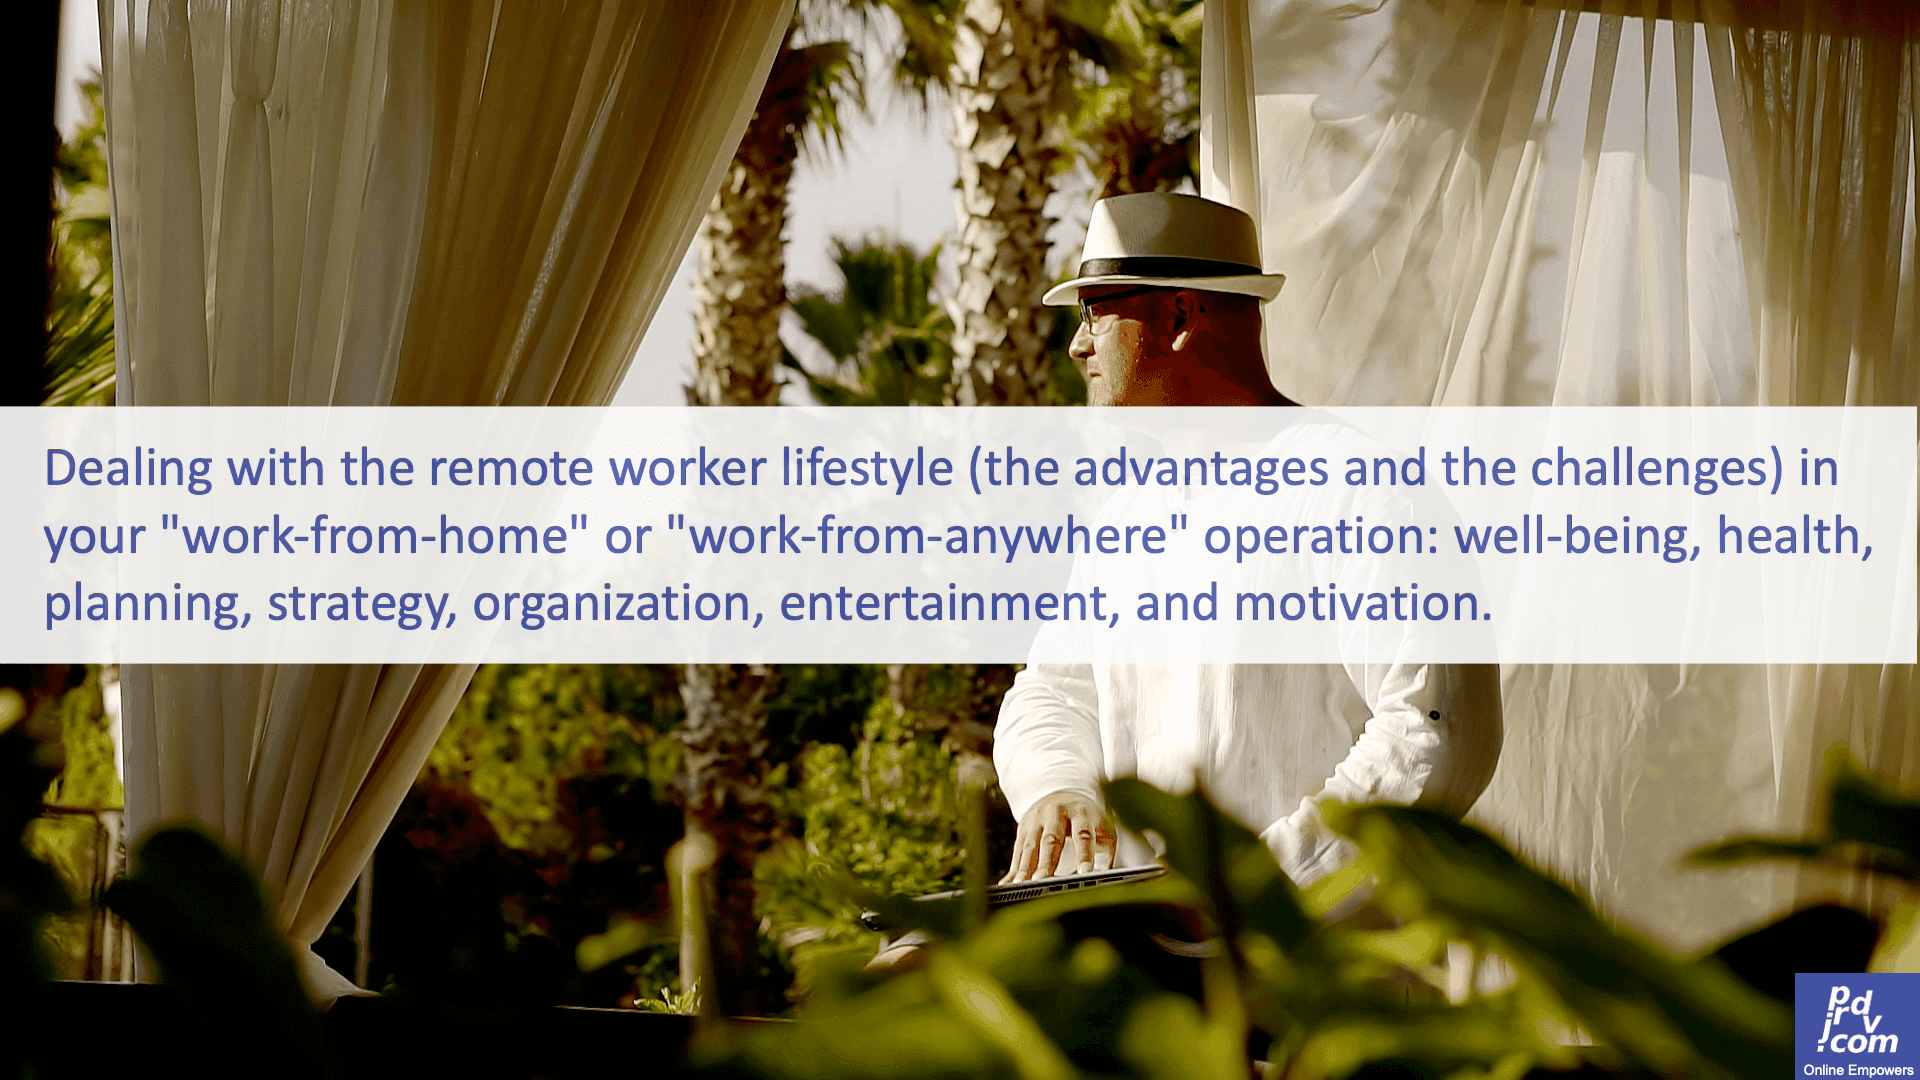 Dealing with the remote worker lifestyle (the advantages and the challenges) in your work-from-home or work-from-anywhere operation: well-being, health, planning, strategy, organization, entertainment, and motivation.